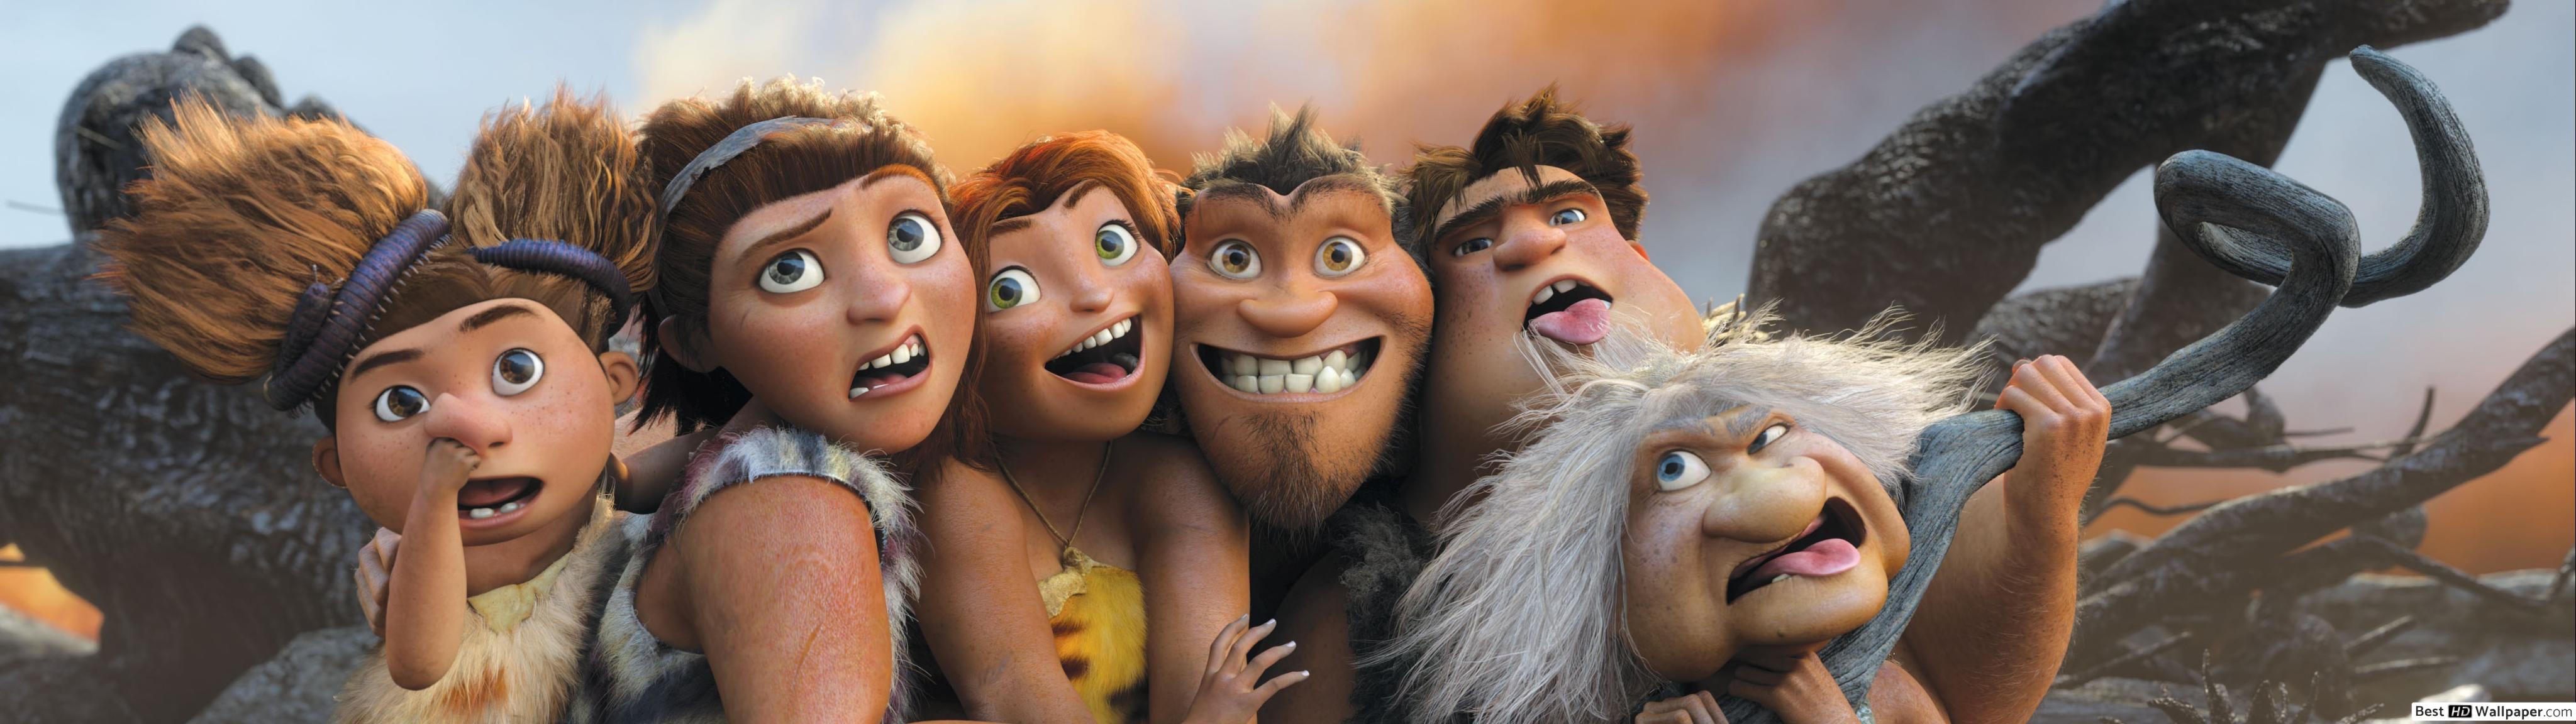 The Croods HD wallpaper download